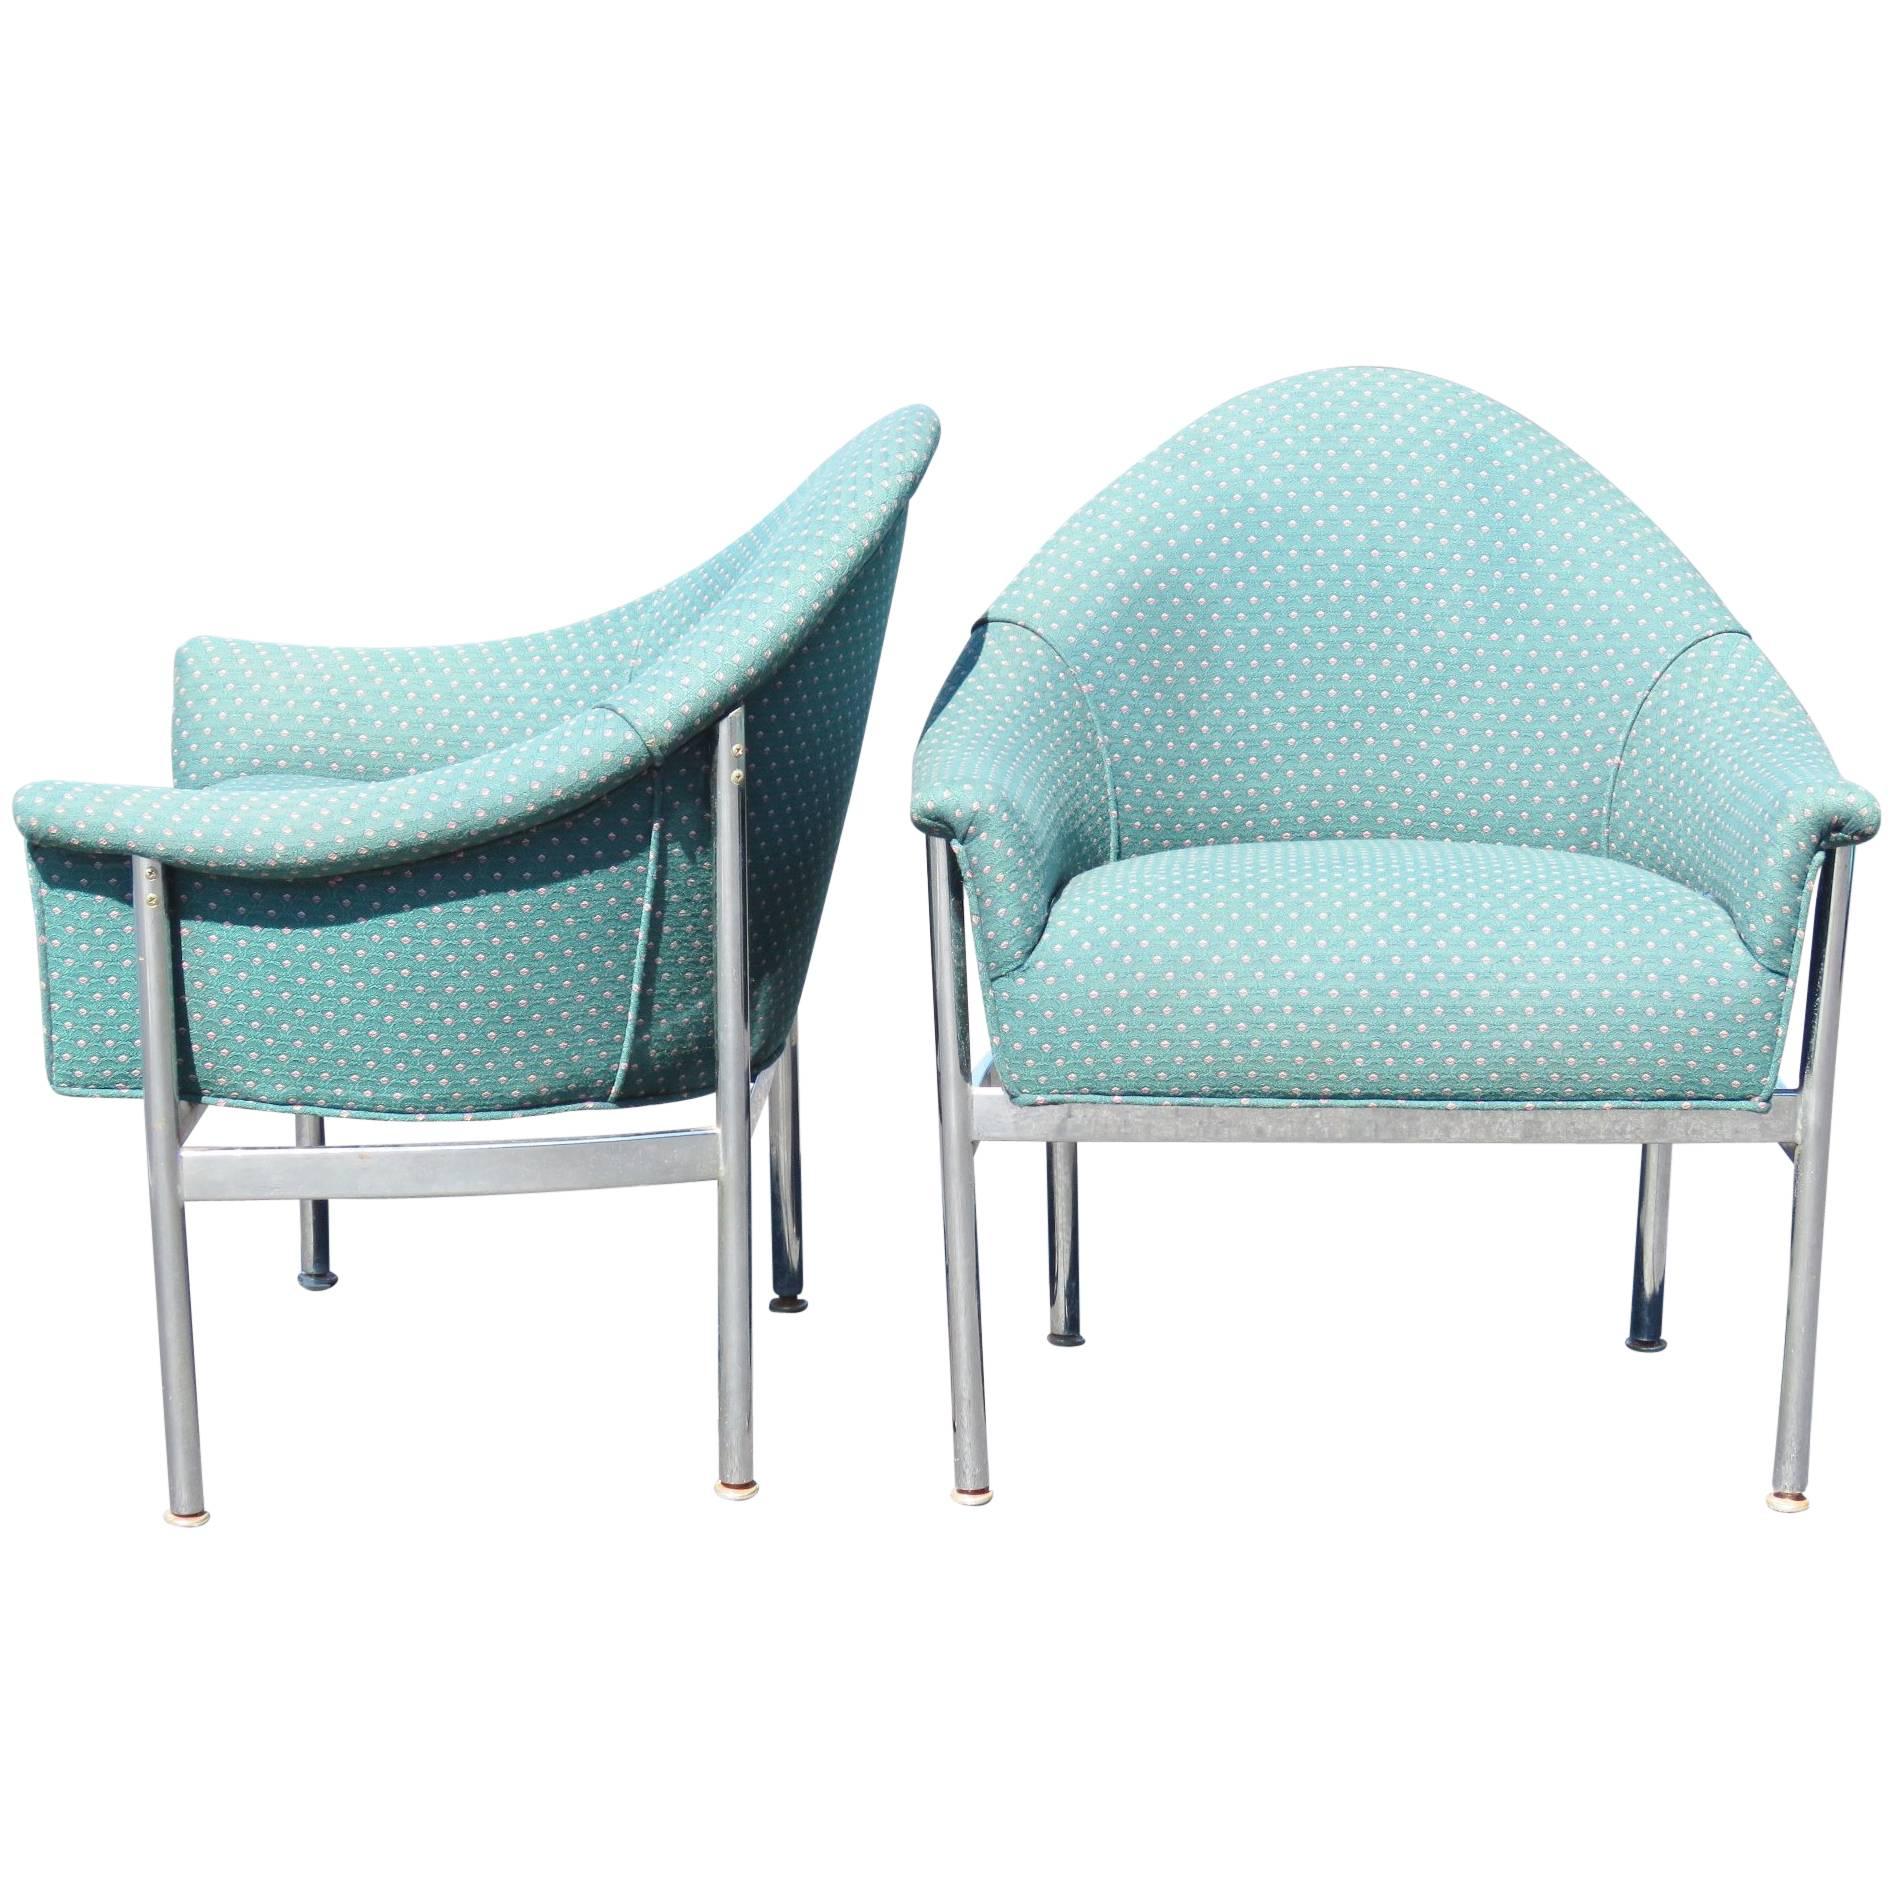 Pair of Modern Design Chrome and Upholstered Lounge Chairs